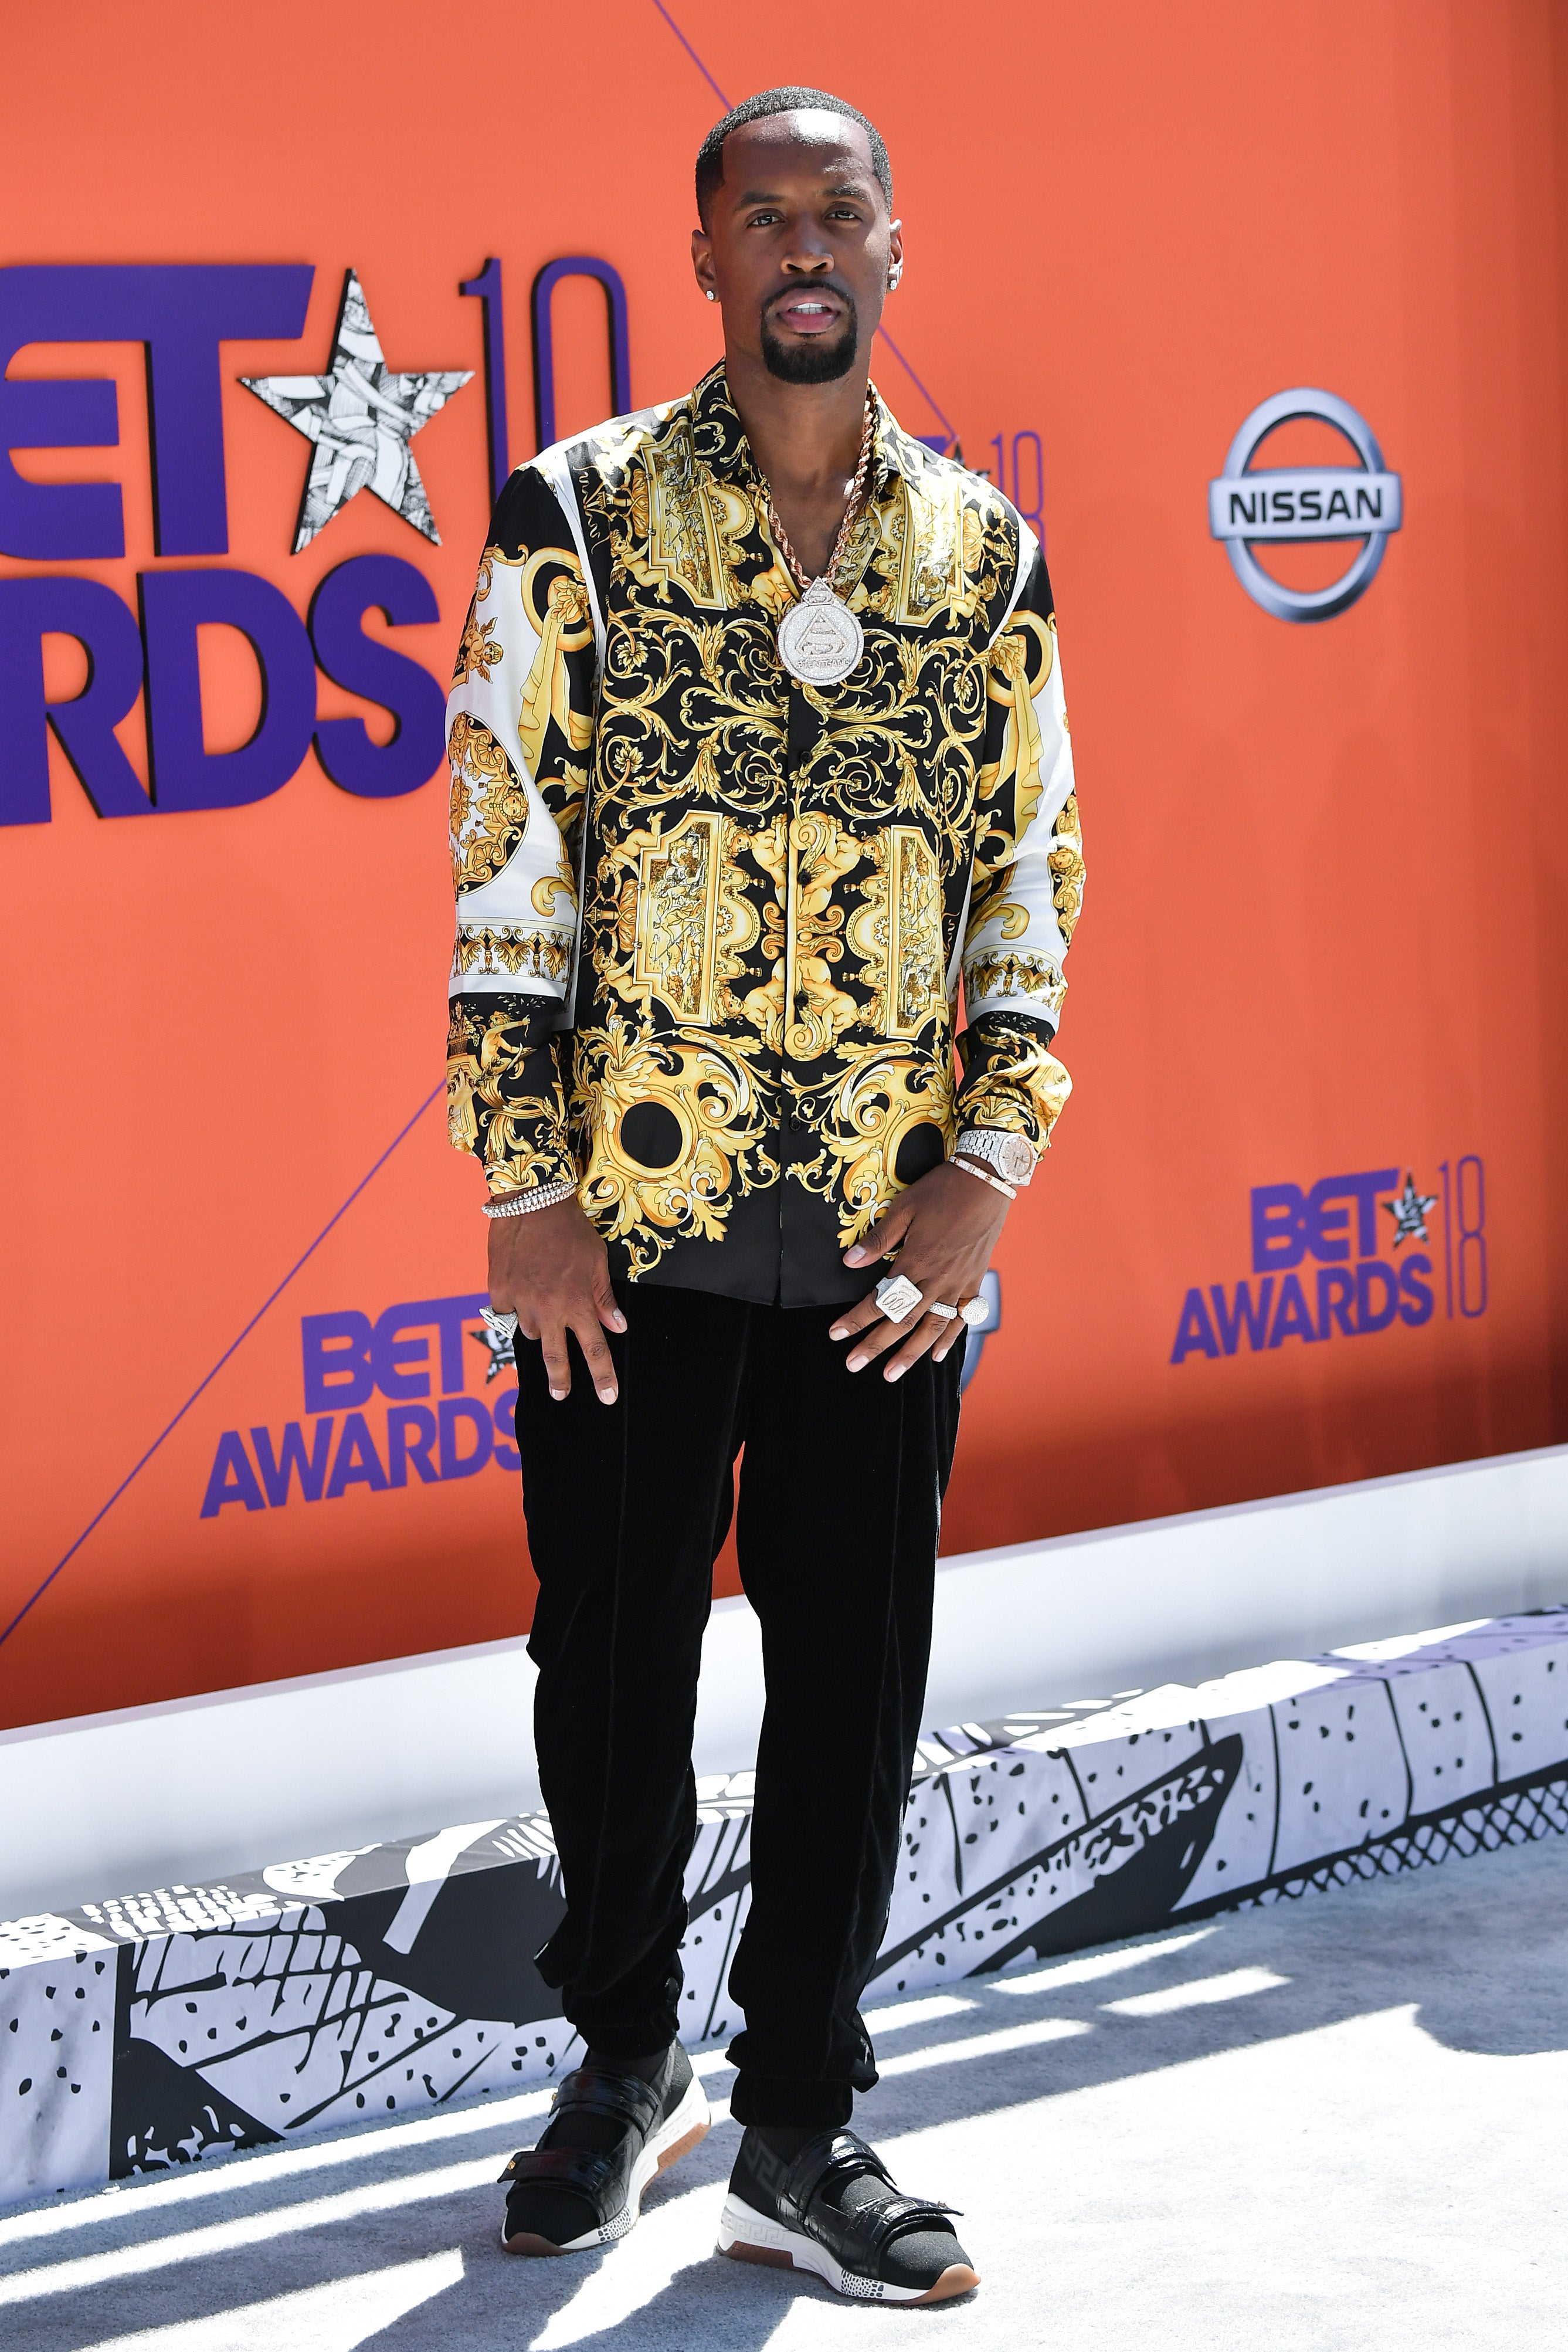 The Biggest And Brightest Black Stars Hit The 2018 BET Awards Red Carpet Looking Lovely
